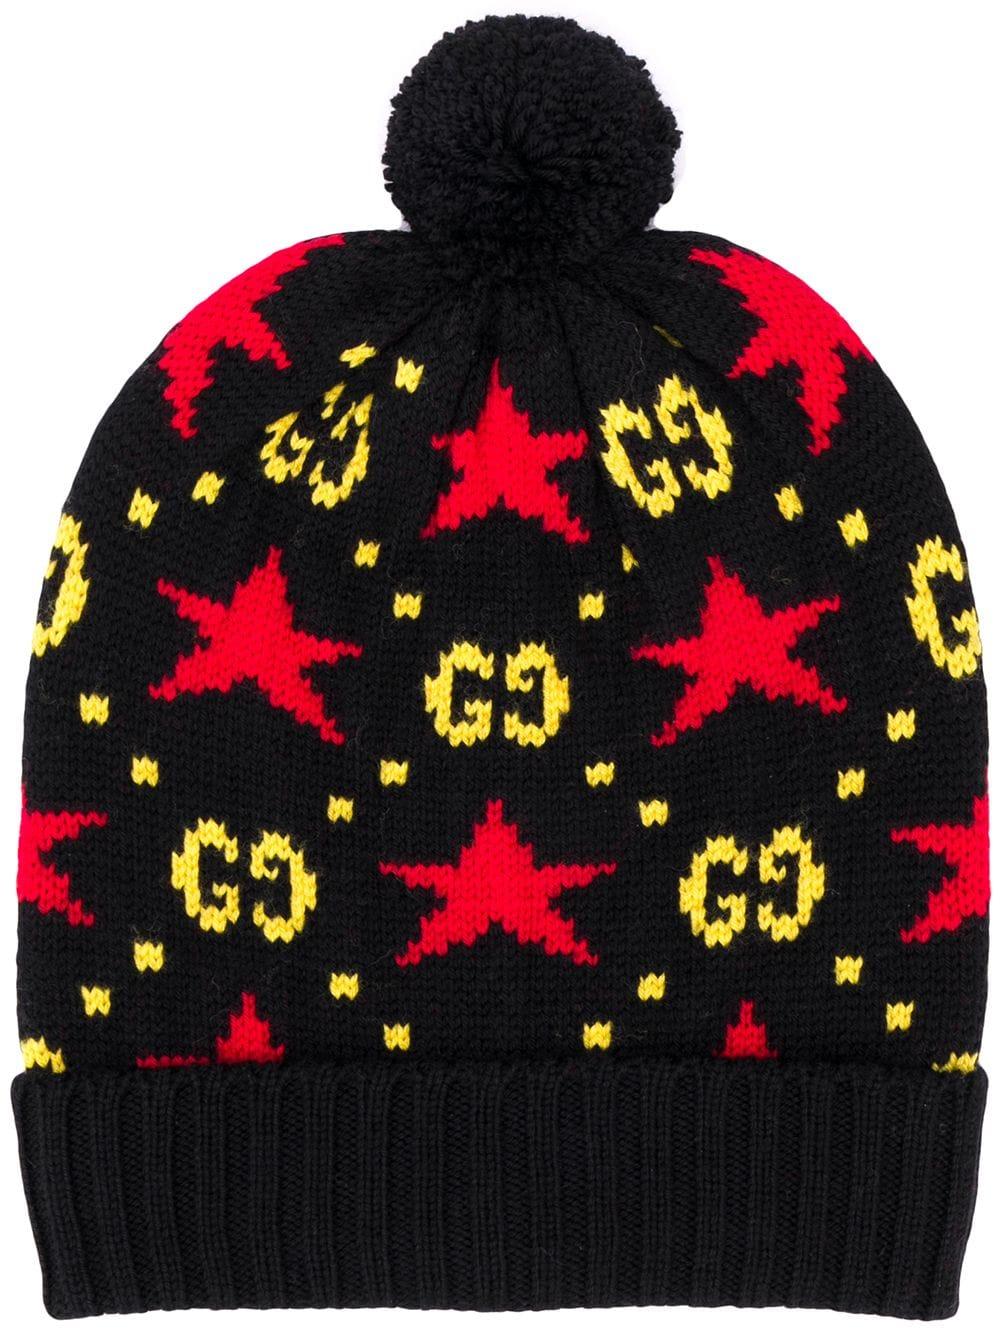 Gucci Wool Knitted Star Hat in Black Yellow (Black) for Men - Lyst